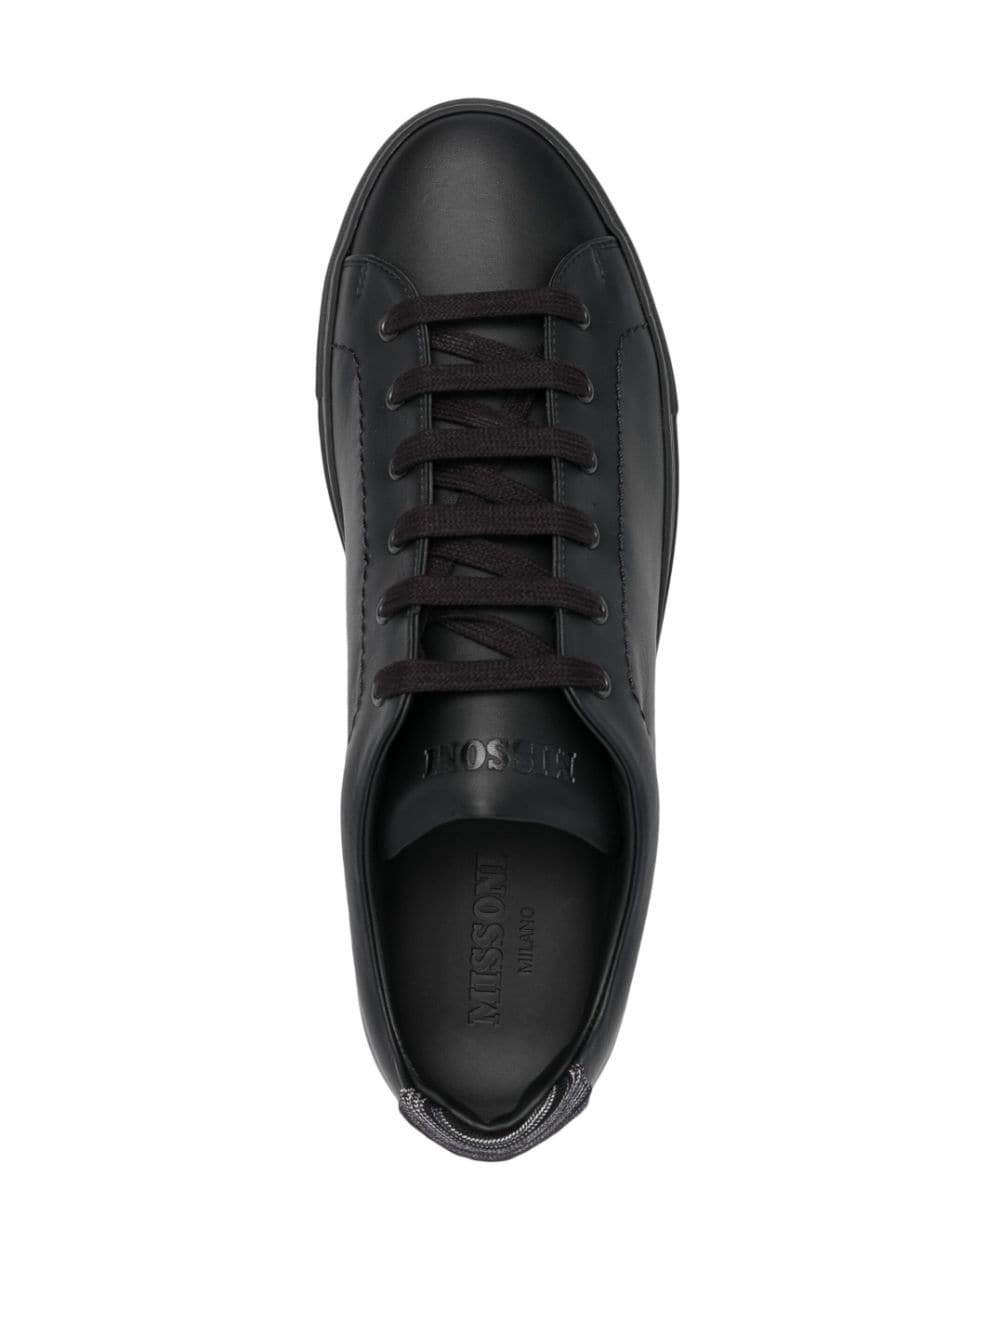 woven-heel counter leather sneakers - 4